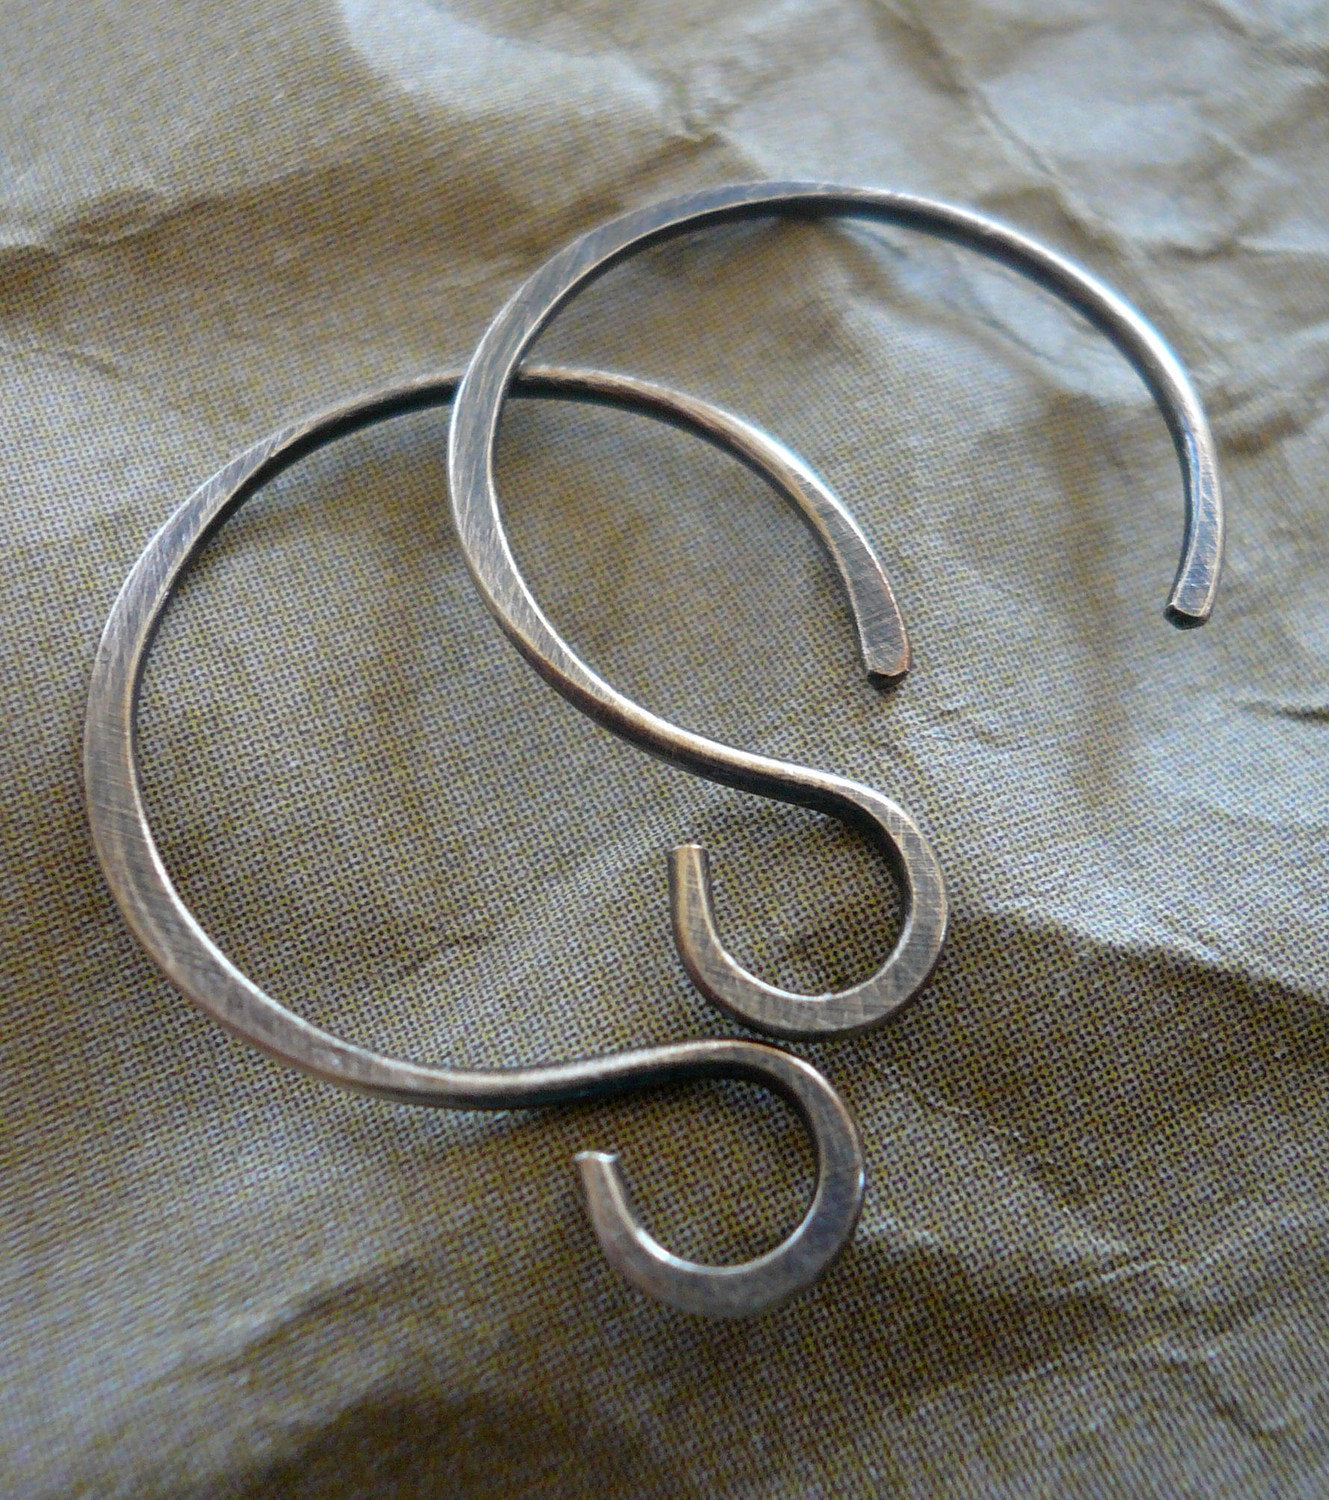 12 Pairs of my Large Solitude Sterling Silver Earwires - Handmade. Handforged. Oxidized and polished